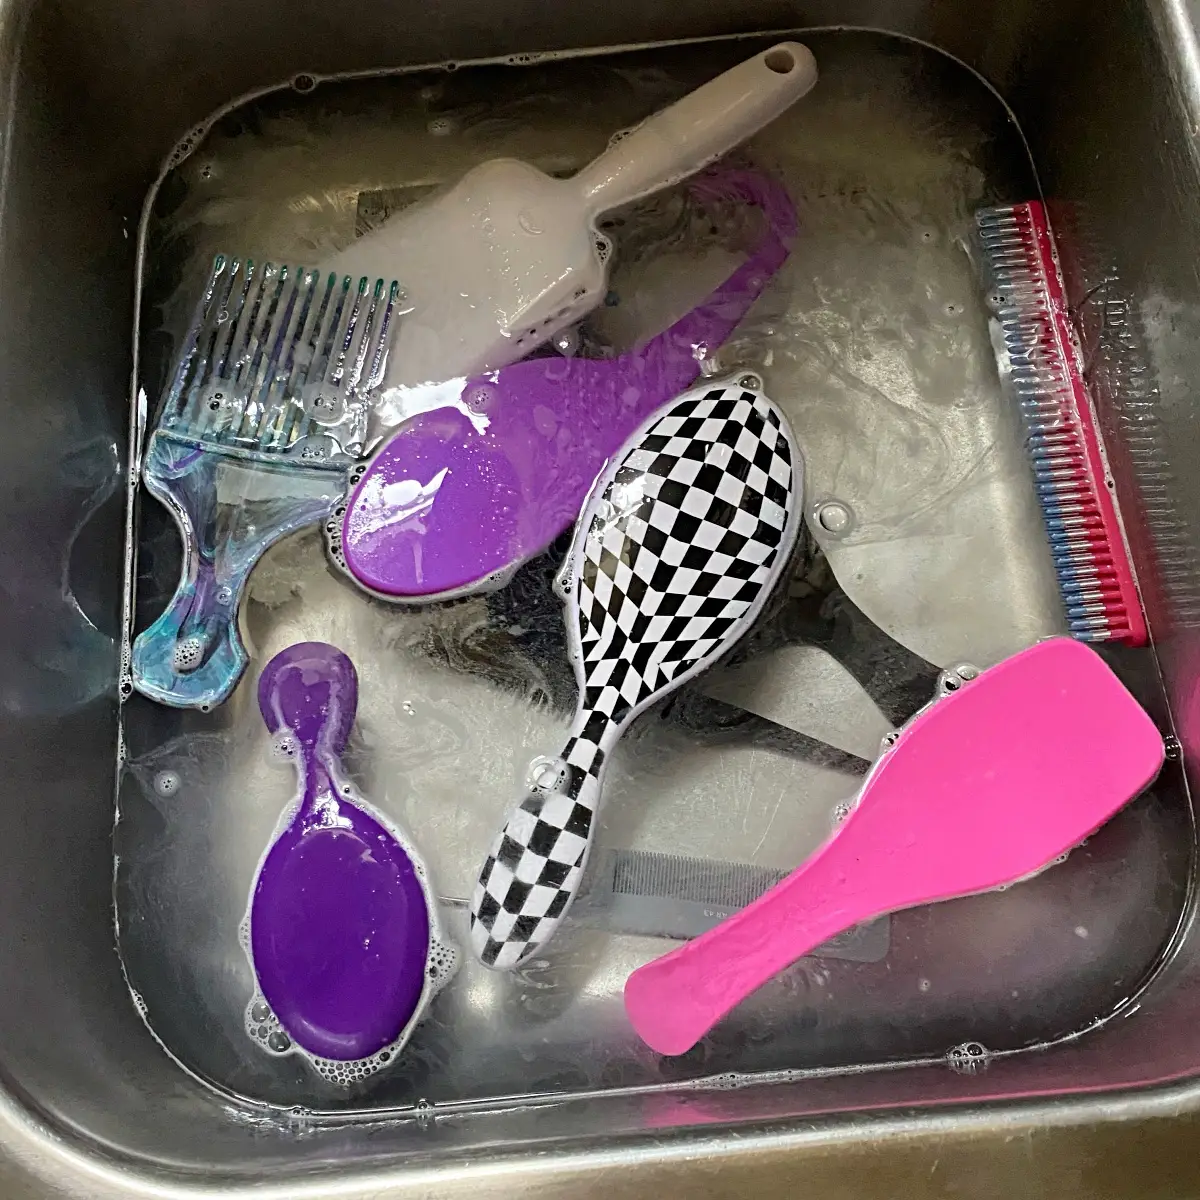 soak hairbrushes in water with soap